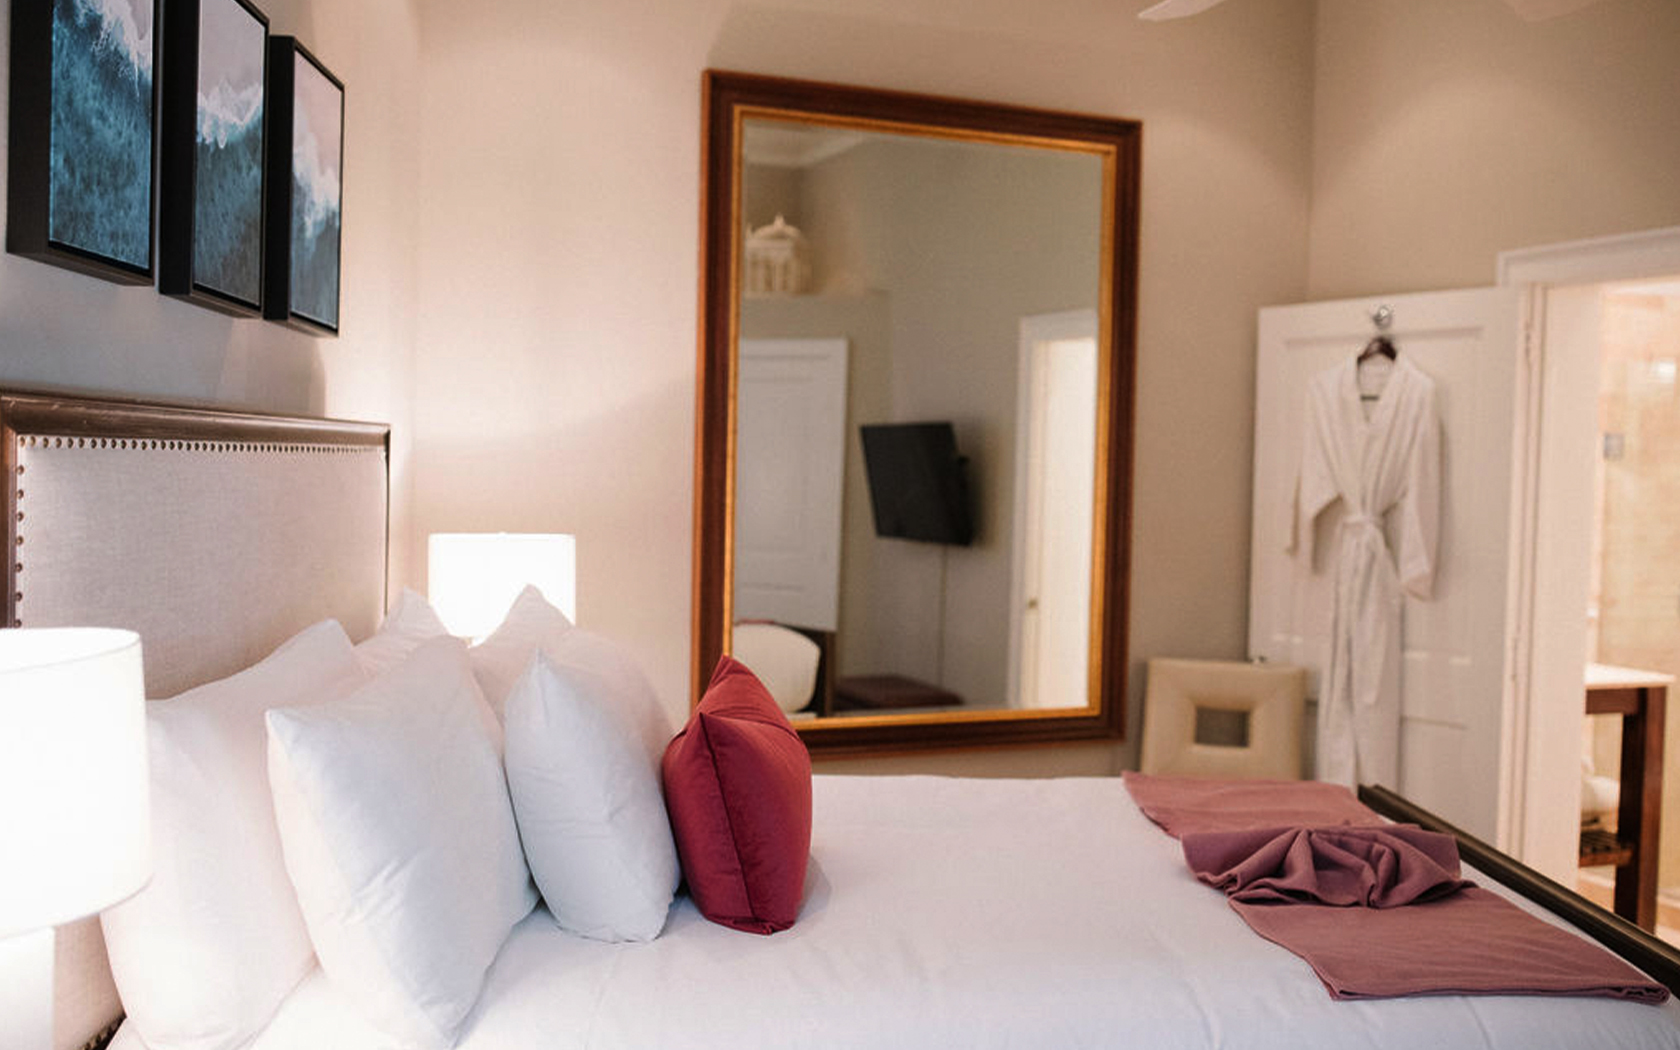 side view of a double bed with a wall mirror and a rob hanging in a door